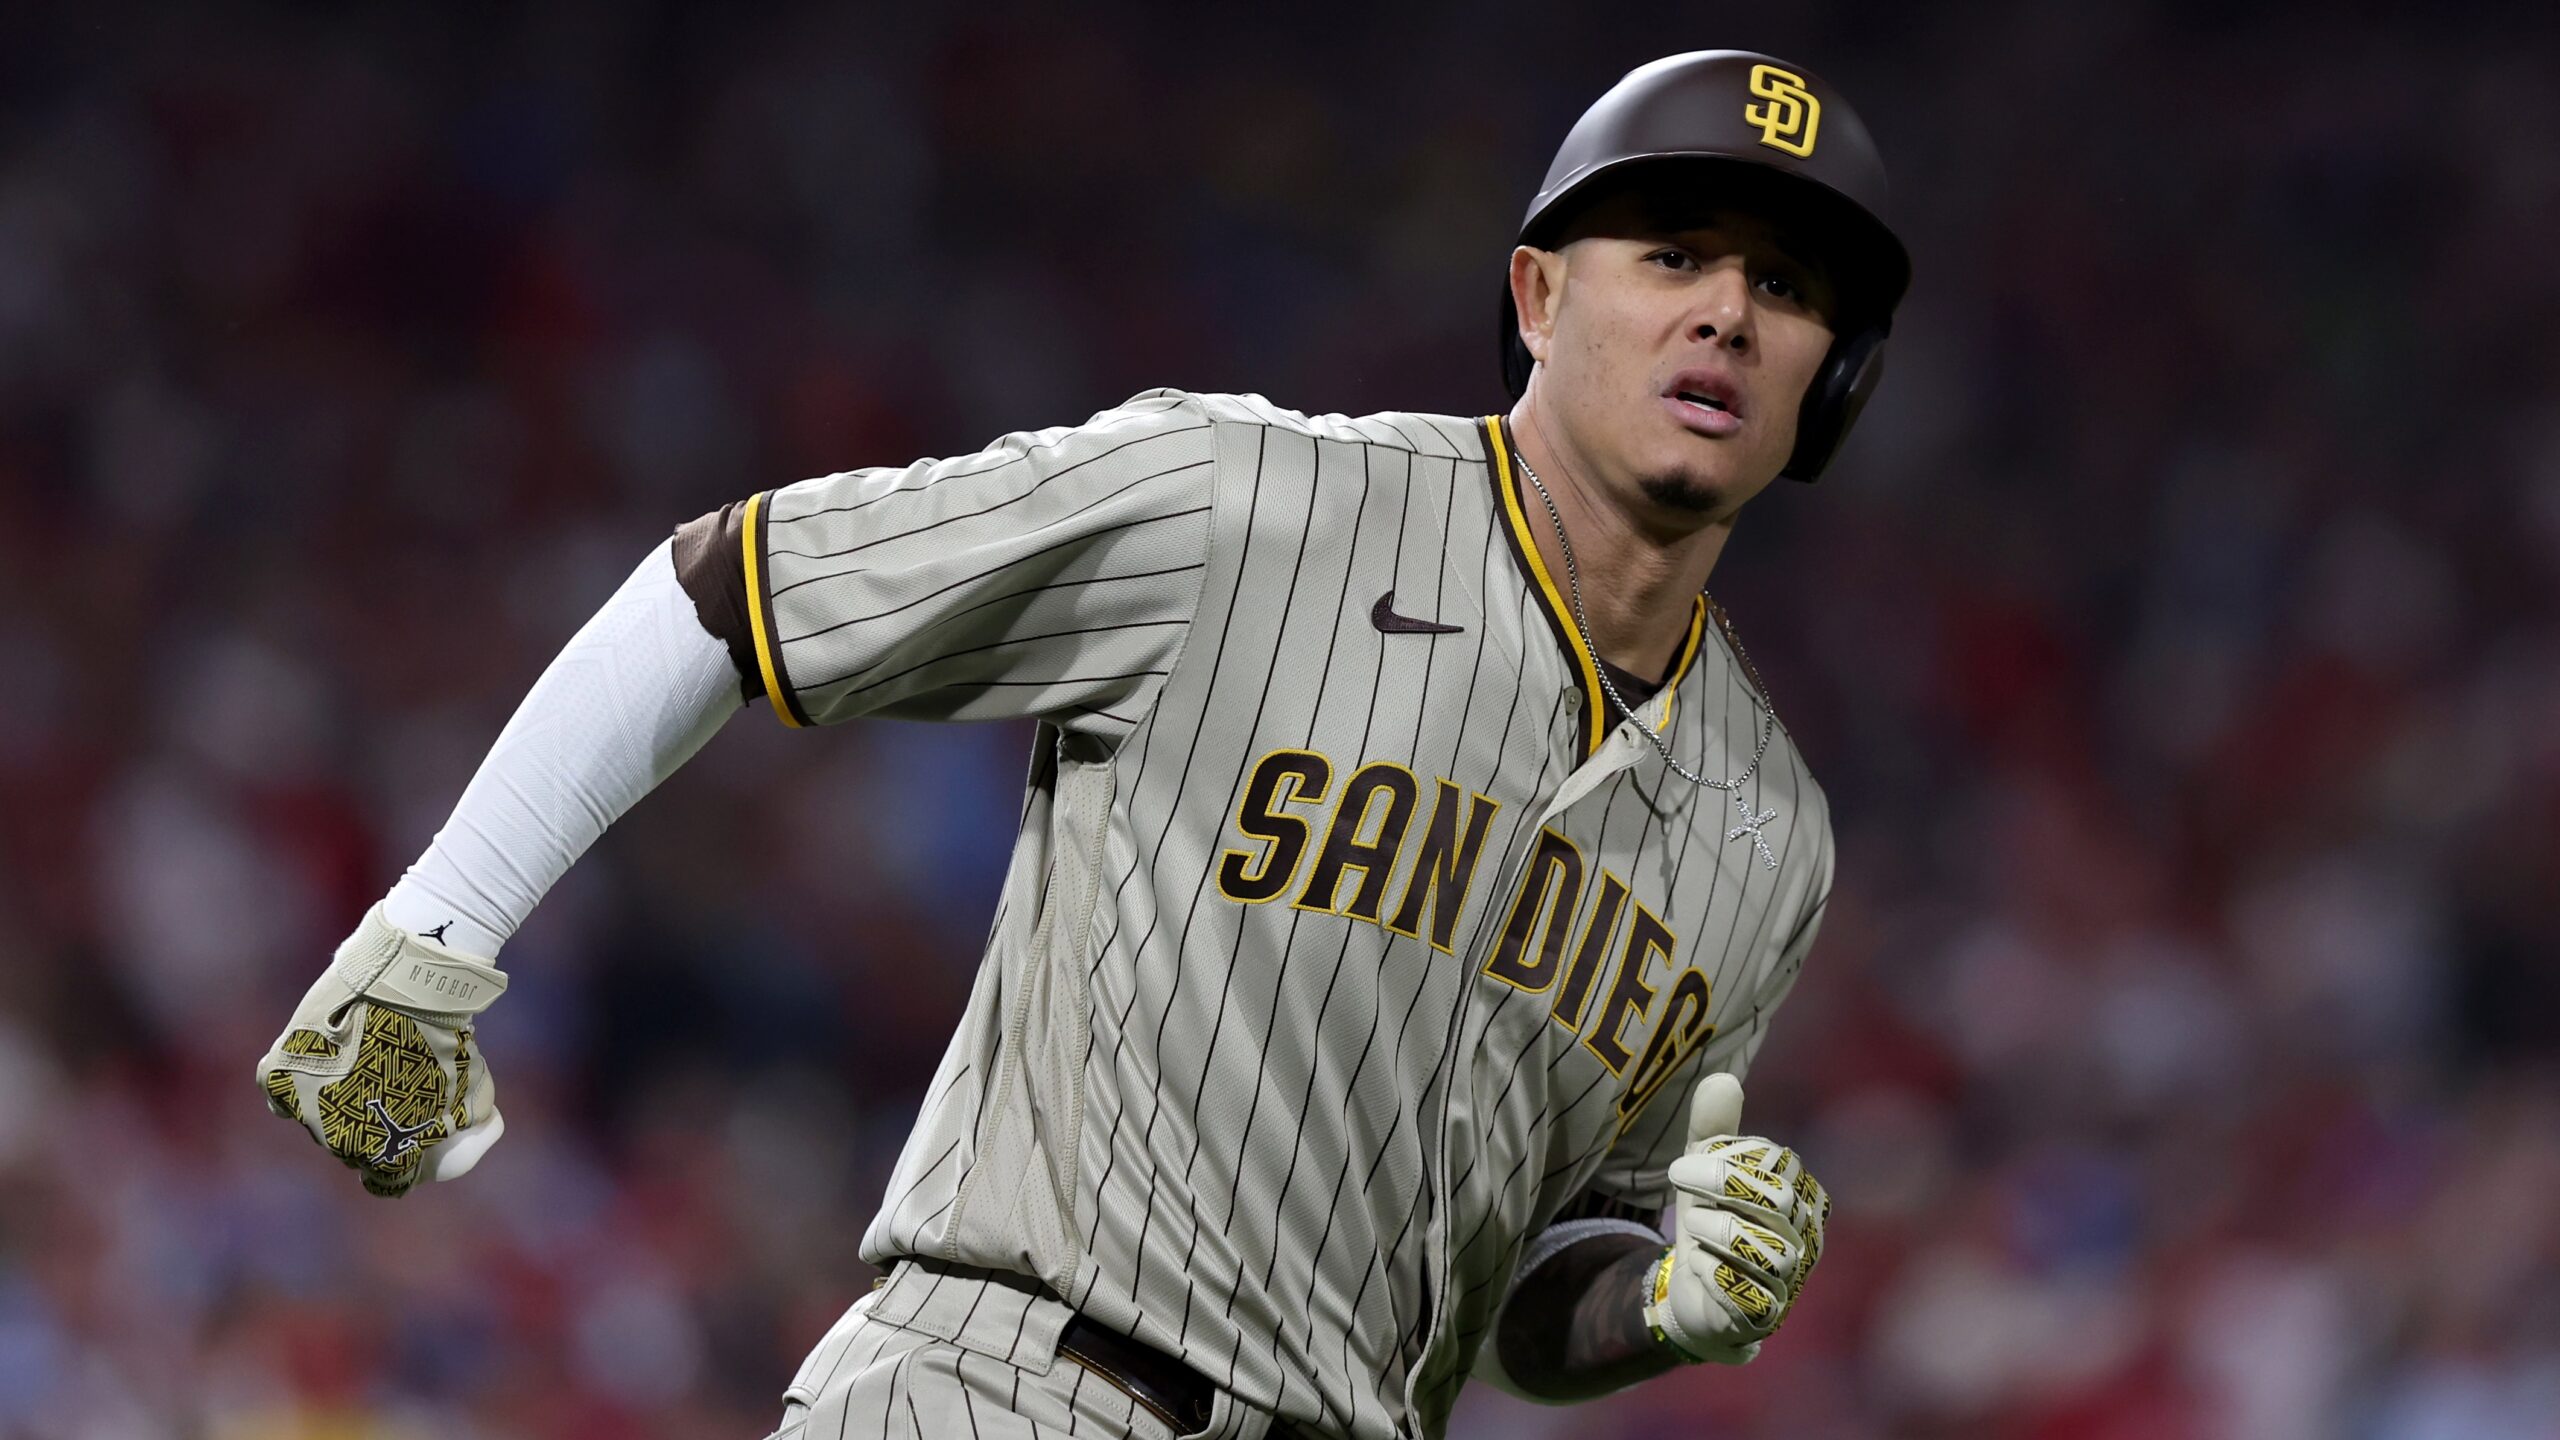 Padres star Machado says he plans to opt out of contract after season